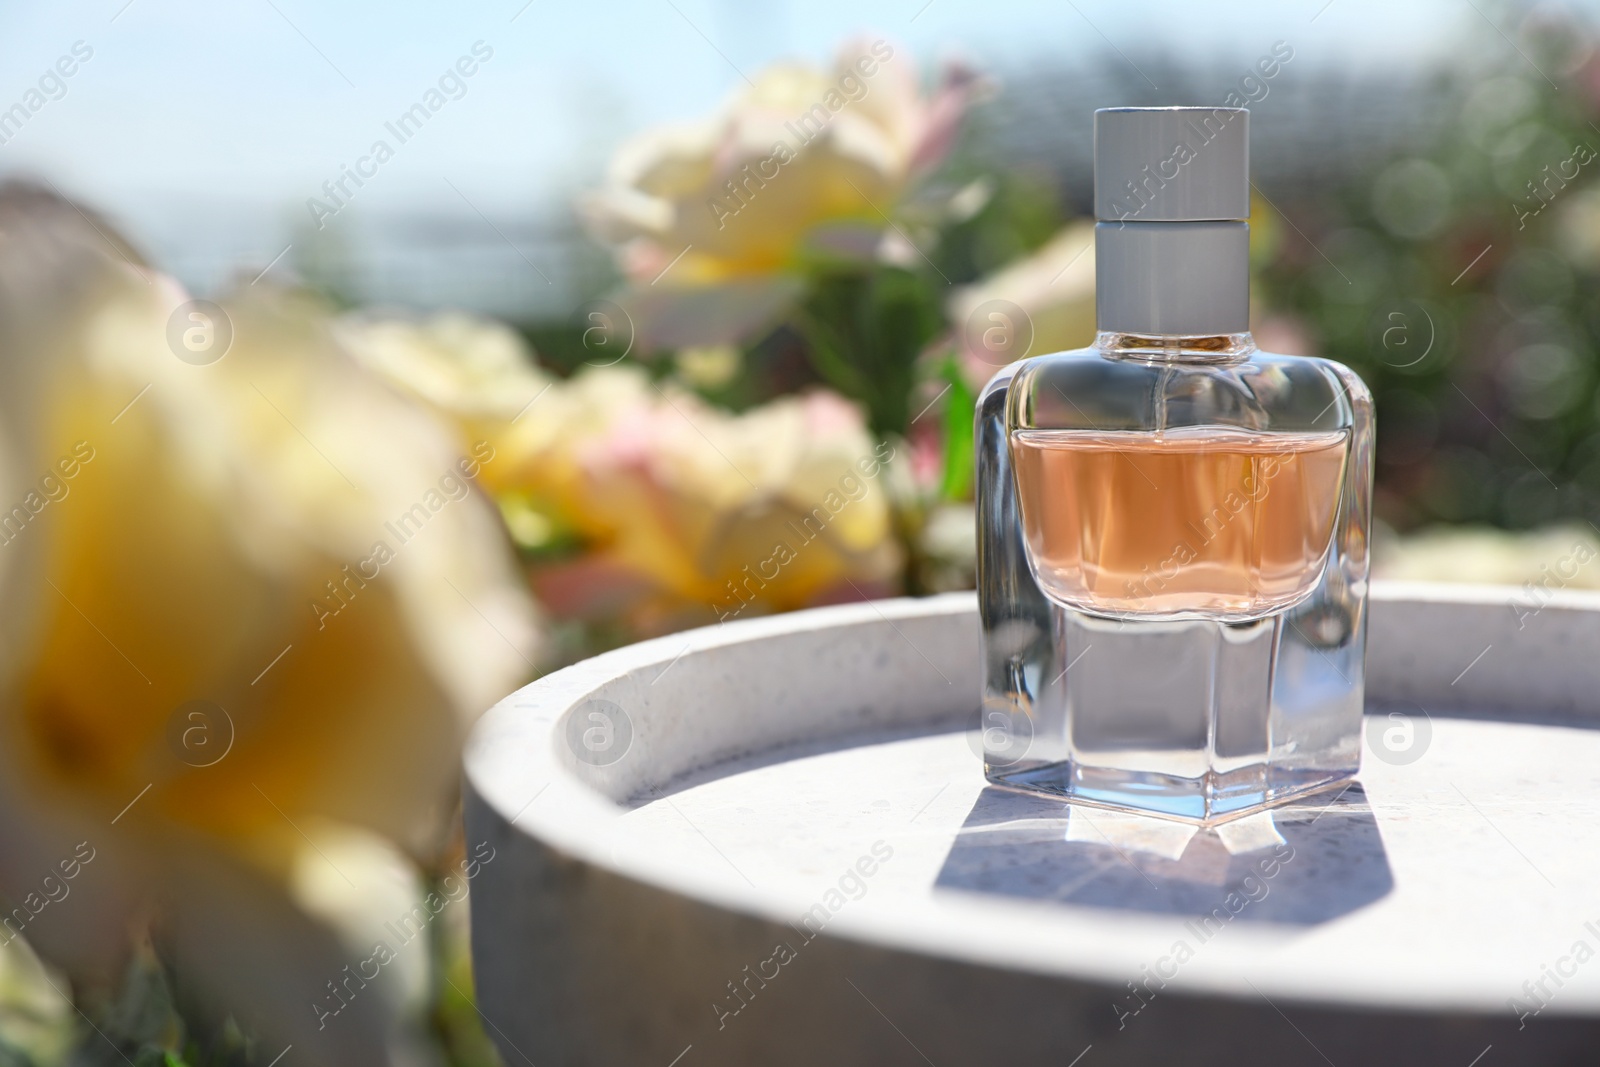 Photo of Bottle with rose perfume on table among flowers in blooming garden, space for text